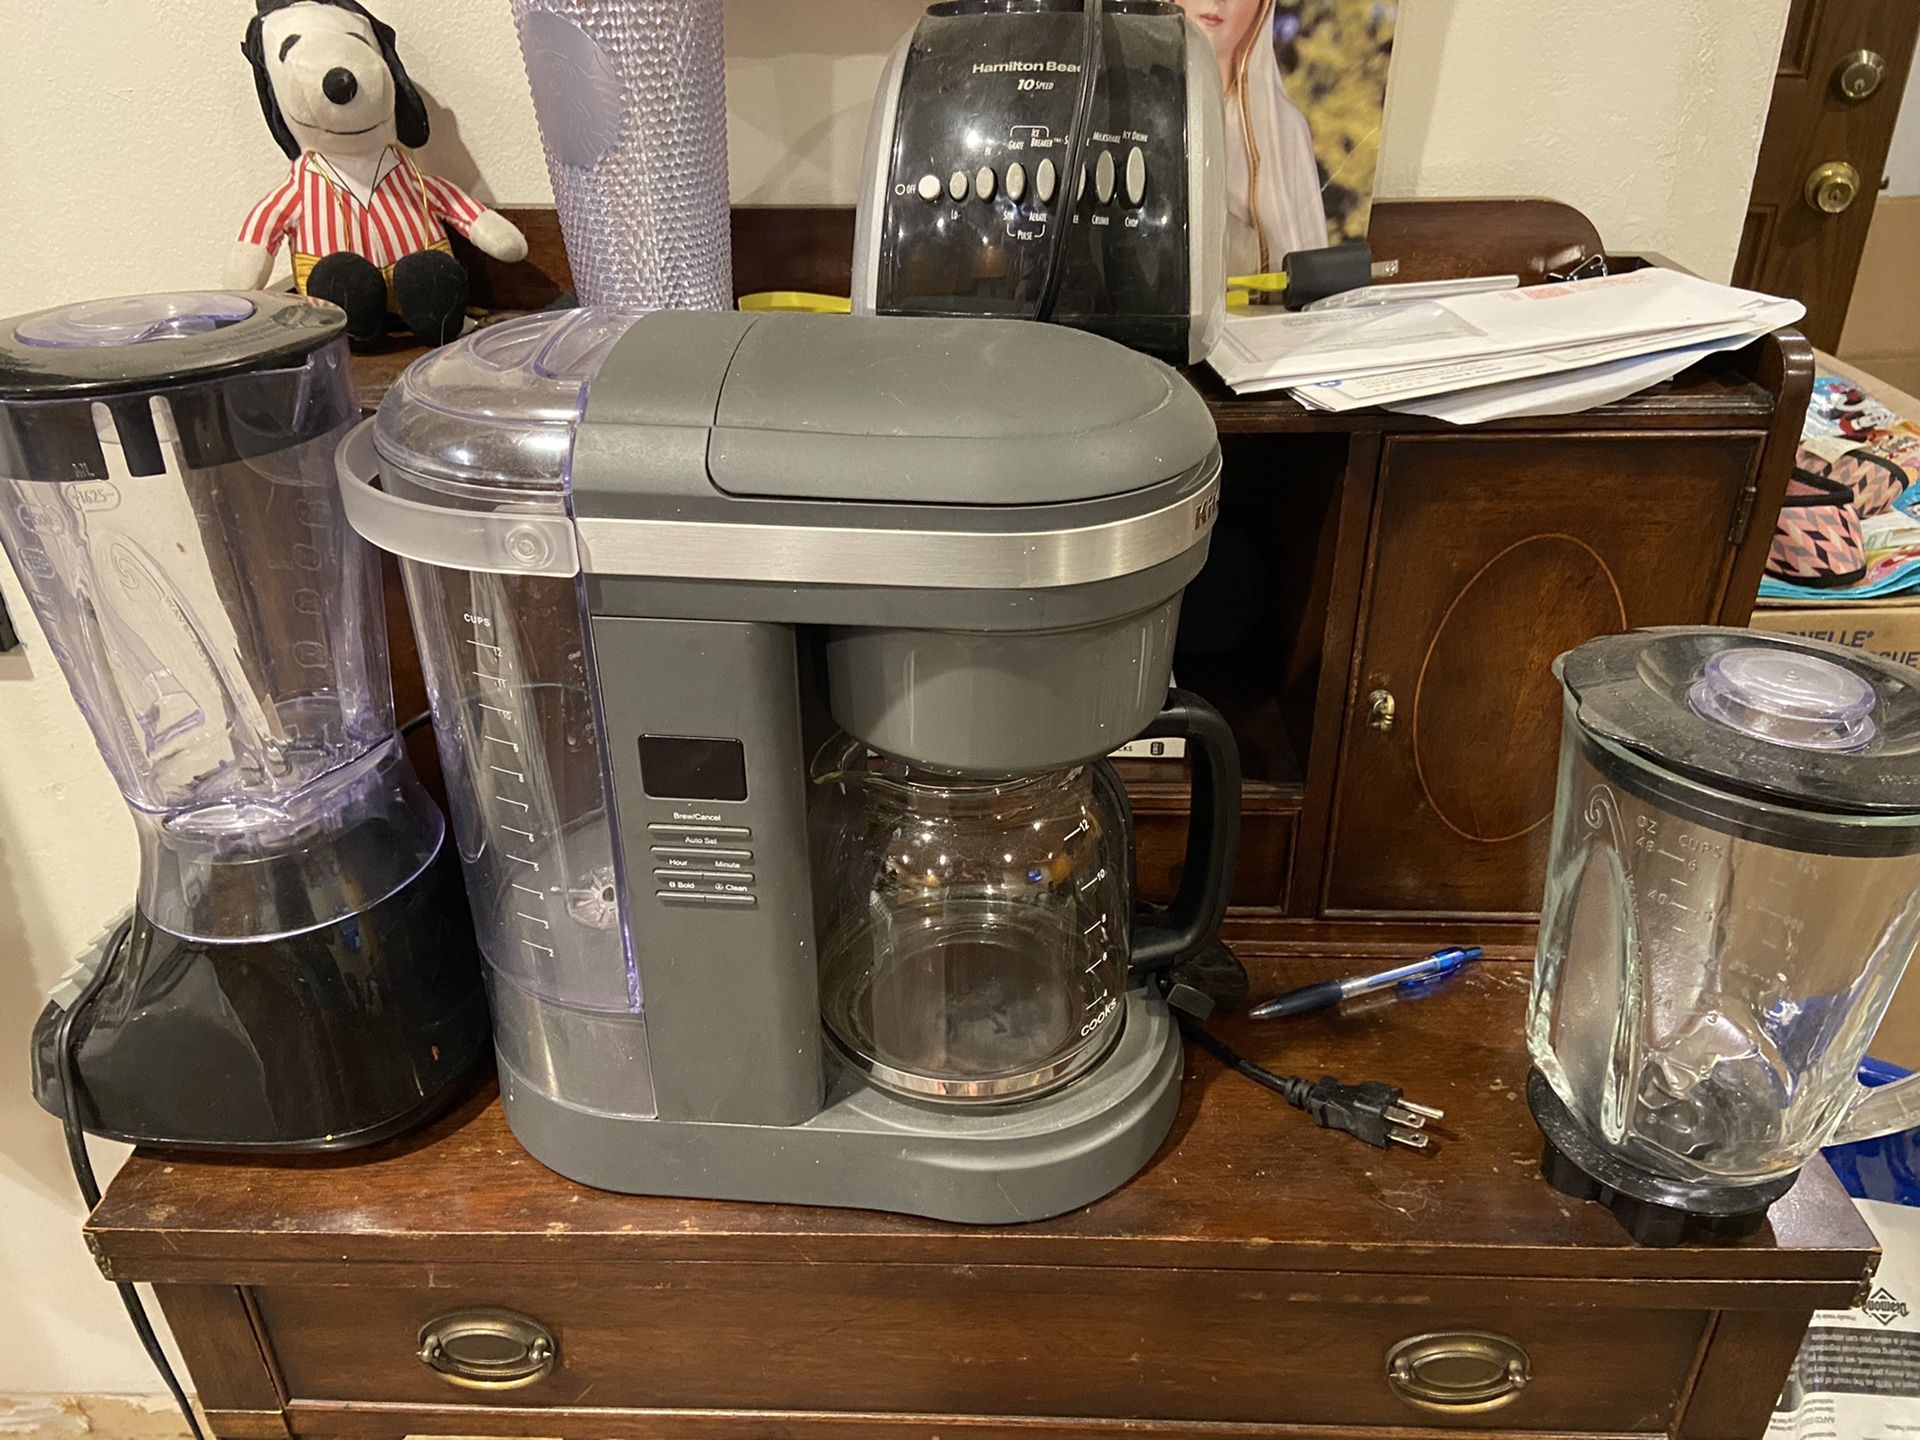 Blenders and coffee maker no pot